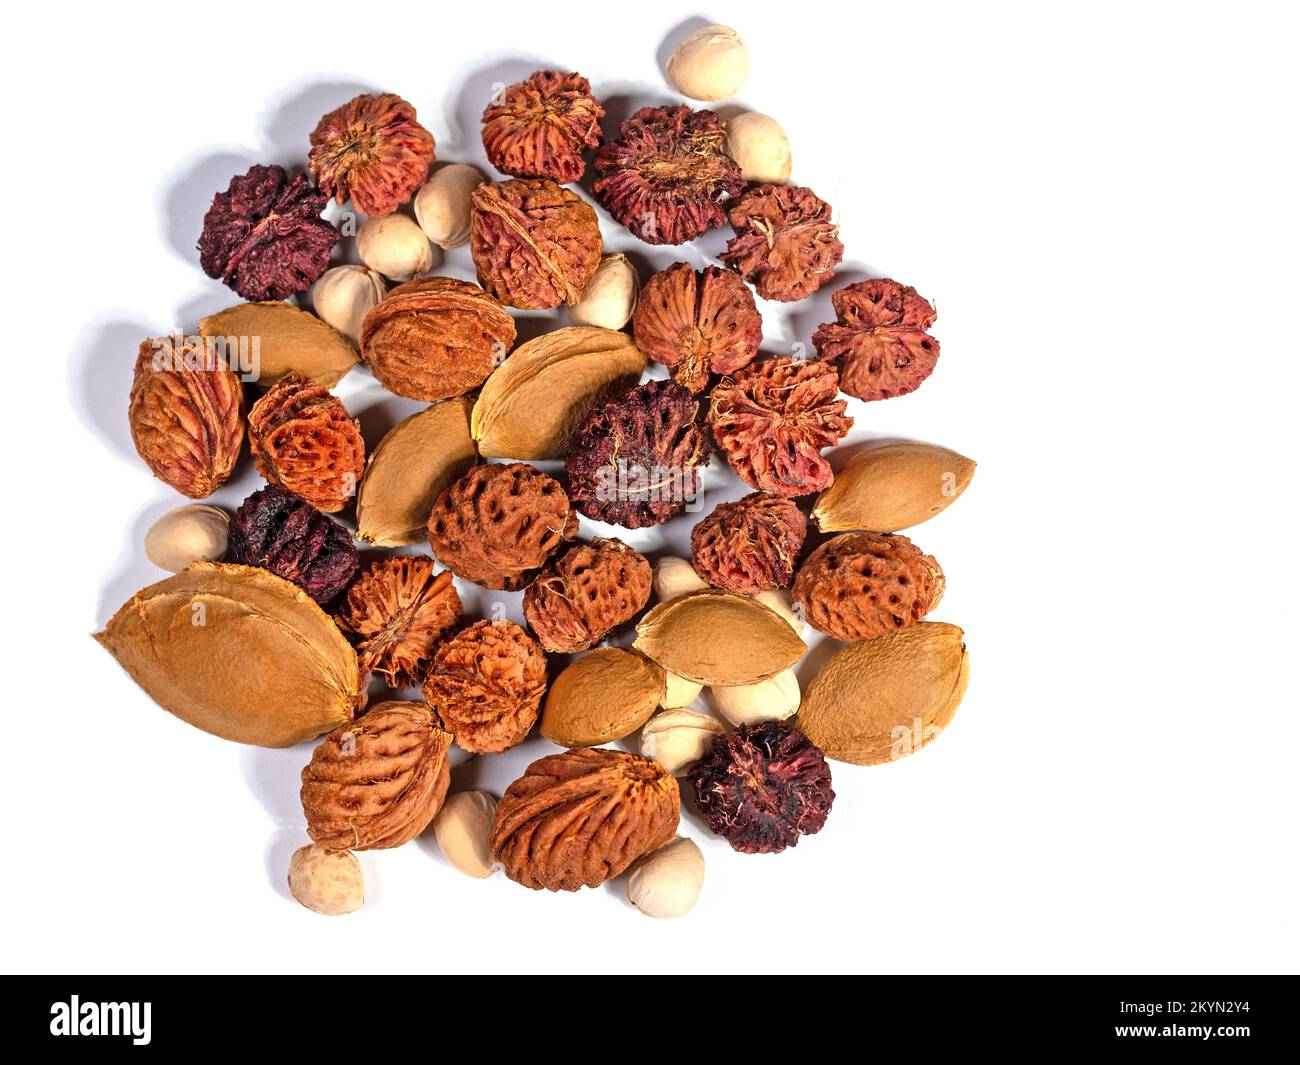 Kernels of different types of stone fruit Stock Photo